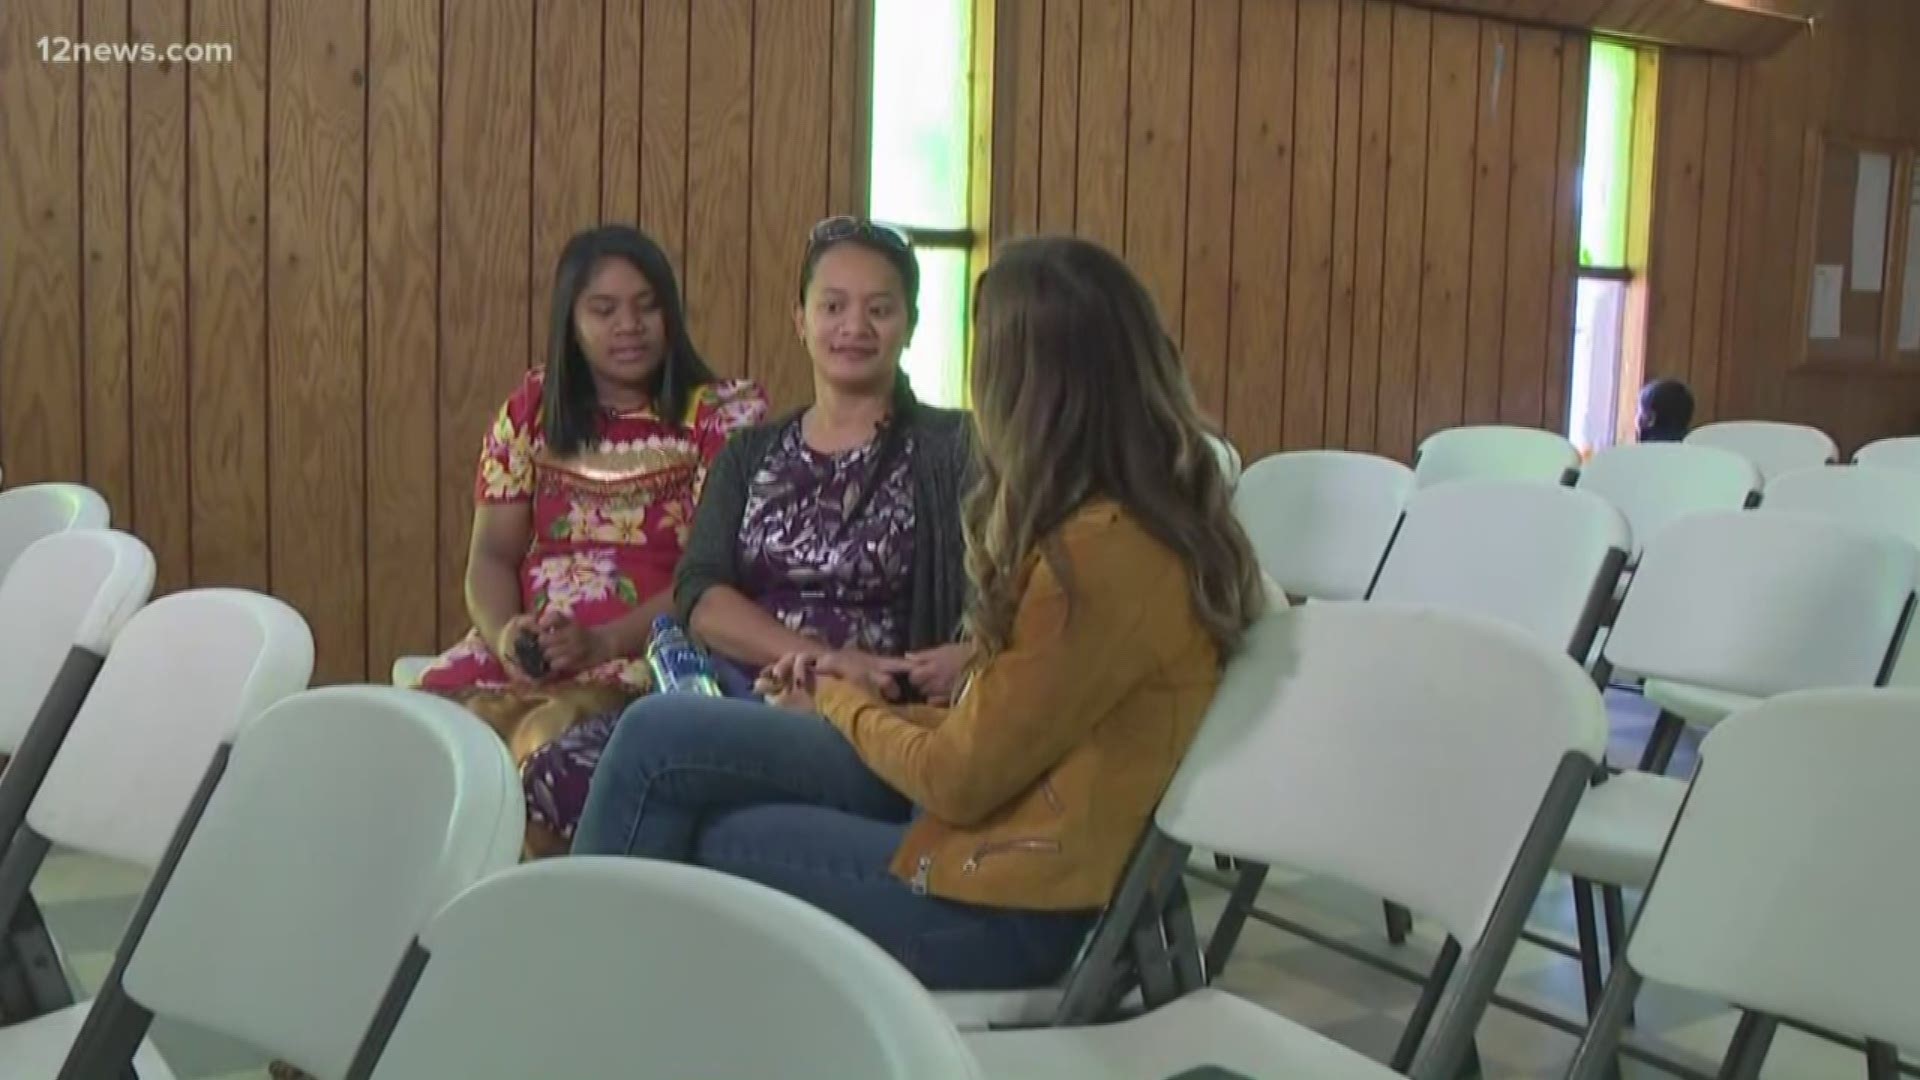 An Arkansas town has the largest population of people from the Marshall Islands in the US. We talked to the community as Paul Petersen faces charges there.